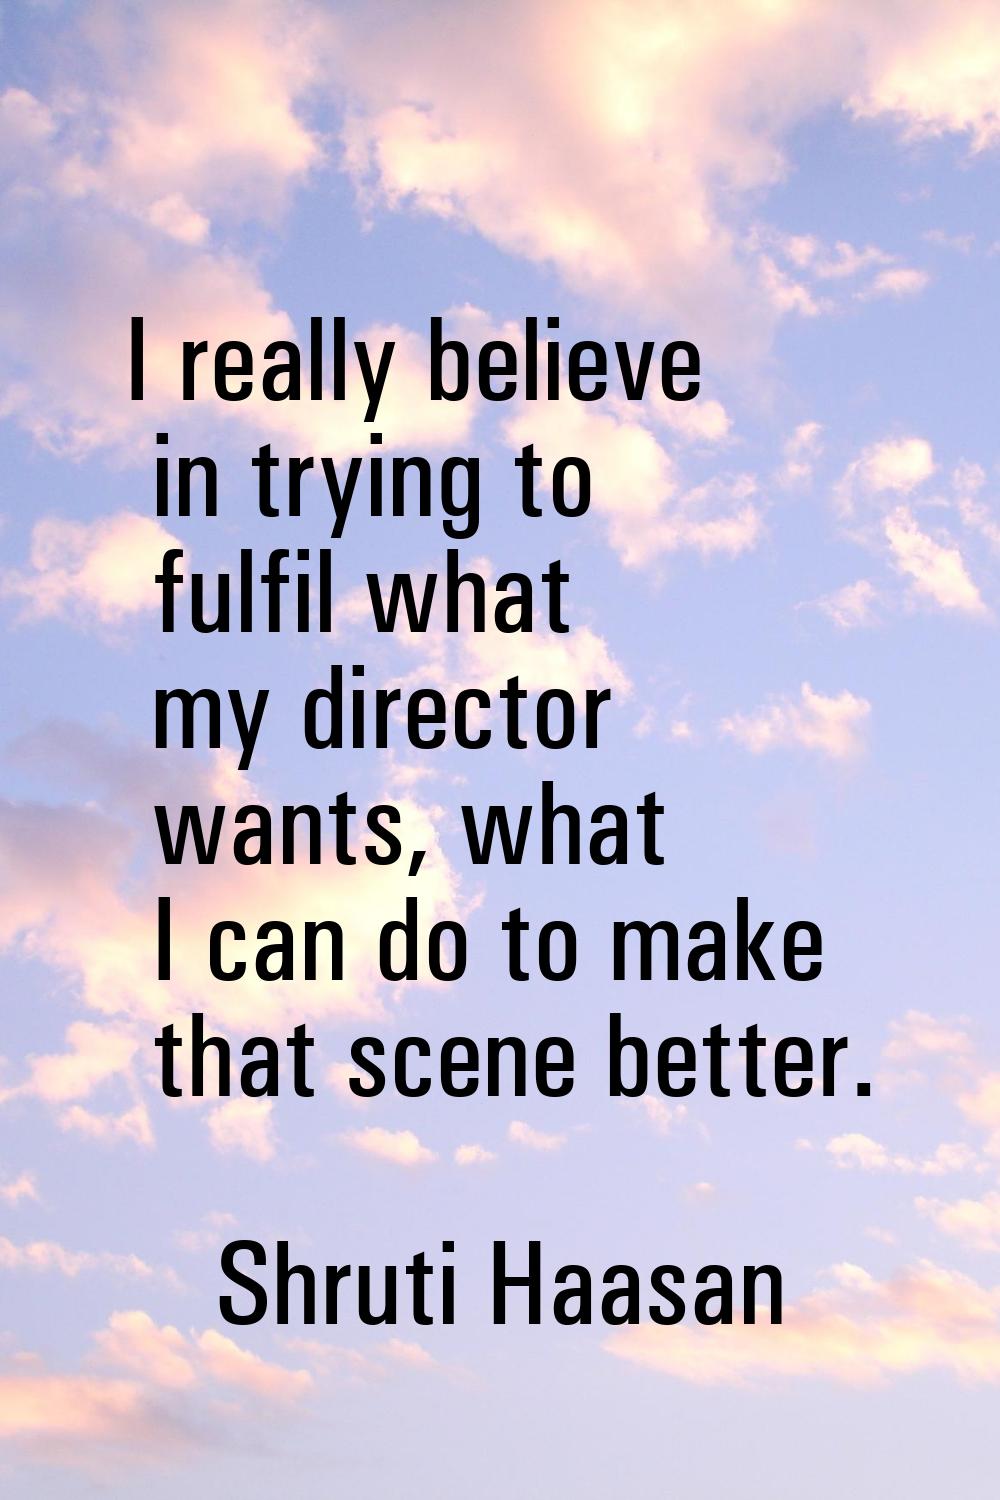 I really believe in trying to fulfil what my director wants, what I can do to make that scene bette